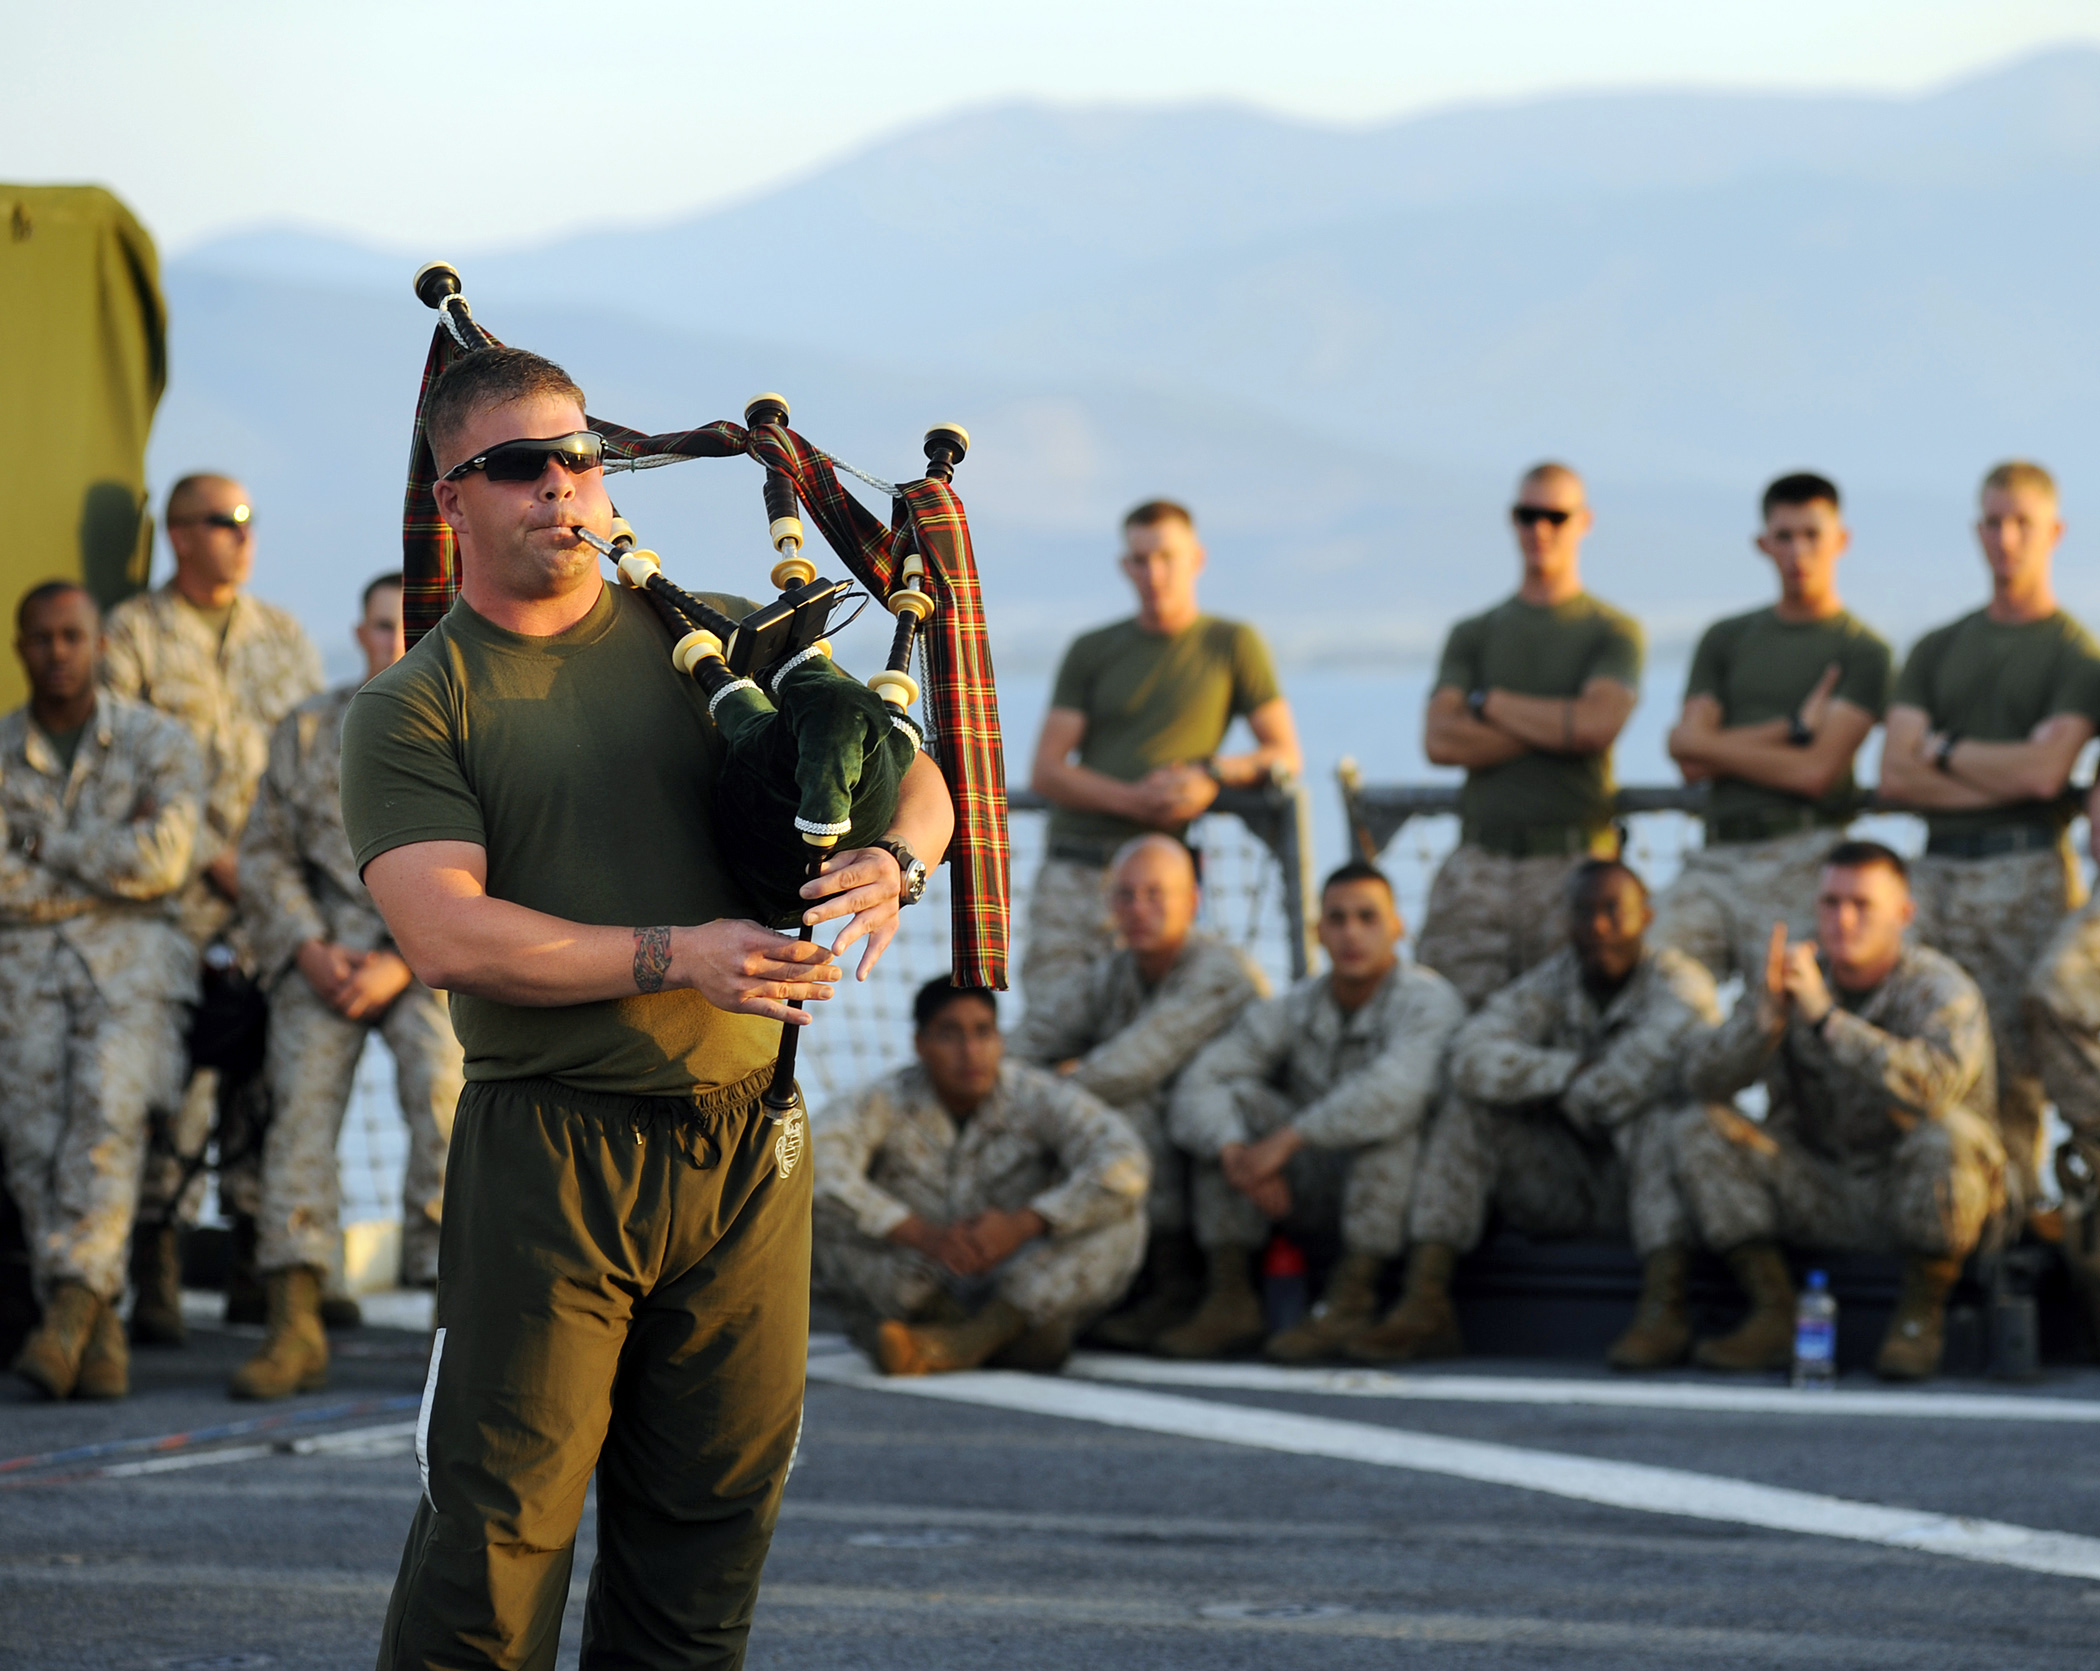 US Navy 090606-N-5345W-377 Cpl. Brian McDonald, assigned to the 22nd Marine Expeditionary Unit (22 MEU) performs a bagpipe medley for the crowd during a morale, welfare and recreation (MWR) sponsored talent show